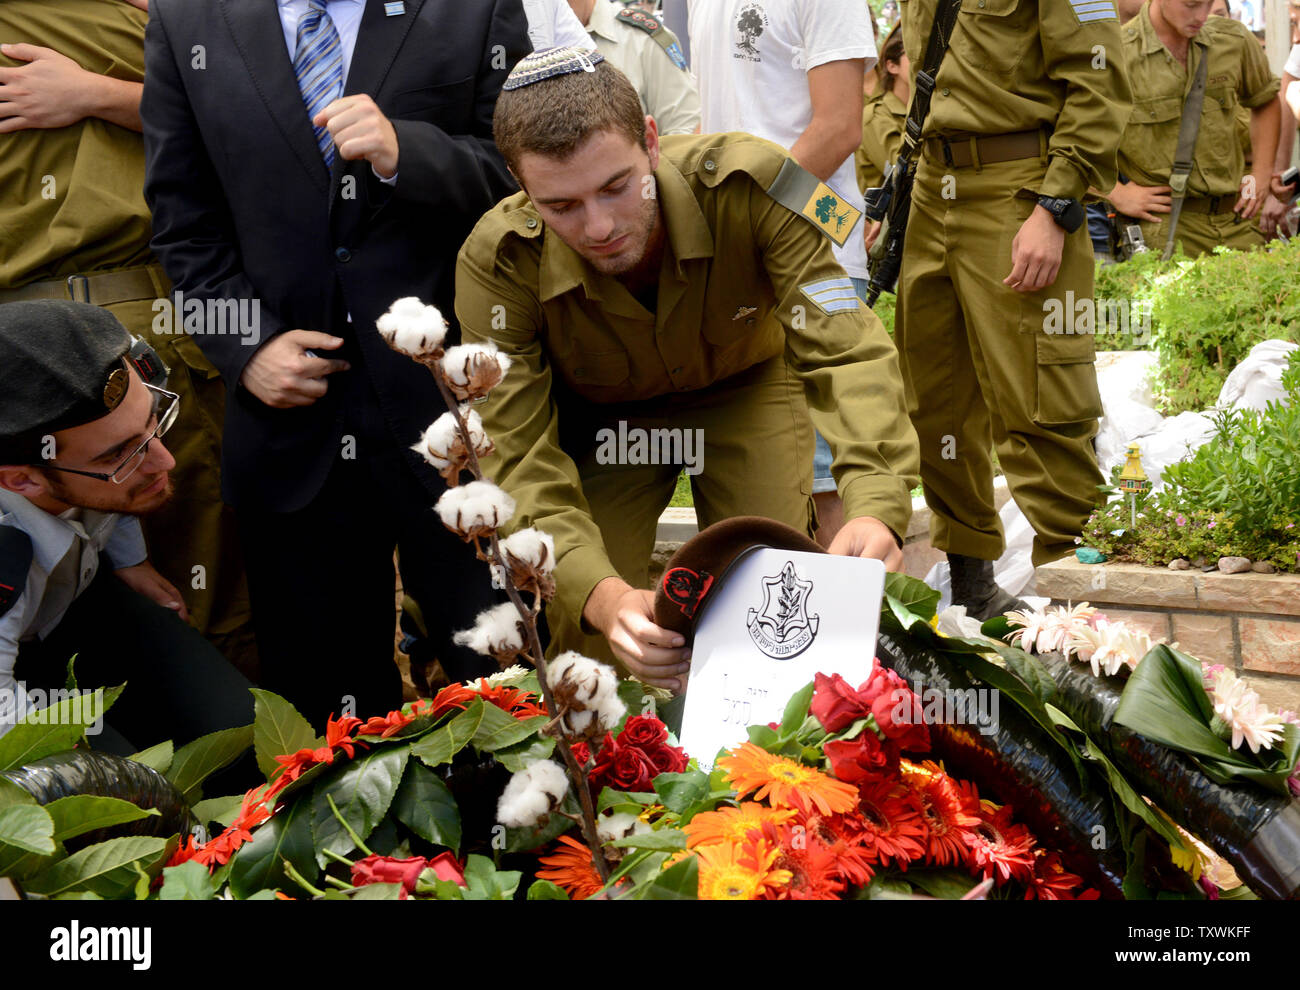 An Israeli soldier places a beret on the flower covered grave of American-Israeli soldier Max Steinberg, 24, at his funeral in the military cemetery on Mt. Herzl in Jerusalem, Israel, July 23, 2014.  Steinberg, a native of Los Angeles, California, immigrated to Israel and enlisted in the Israel Defense Forces in 2012, where he served as a sharpshooter in the elite Golani Brigade. He was among the 13 soldiers killed by Palestinian militants in the Gaza Strip on Sunday. Twenty-nine Israeli troops have been killed since the army launched a ground incursion into Gaza last week. More than 30,000 pe Stock Photo